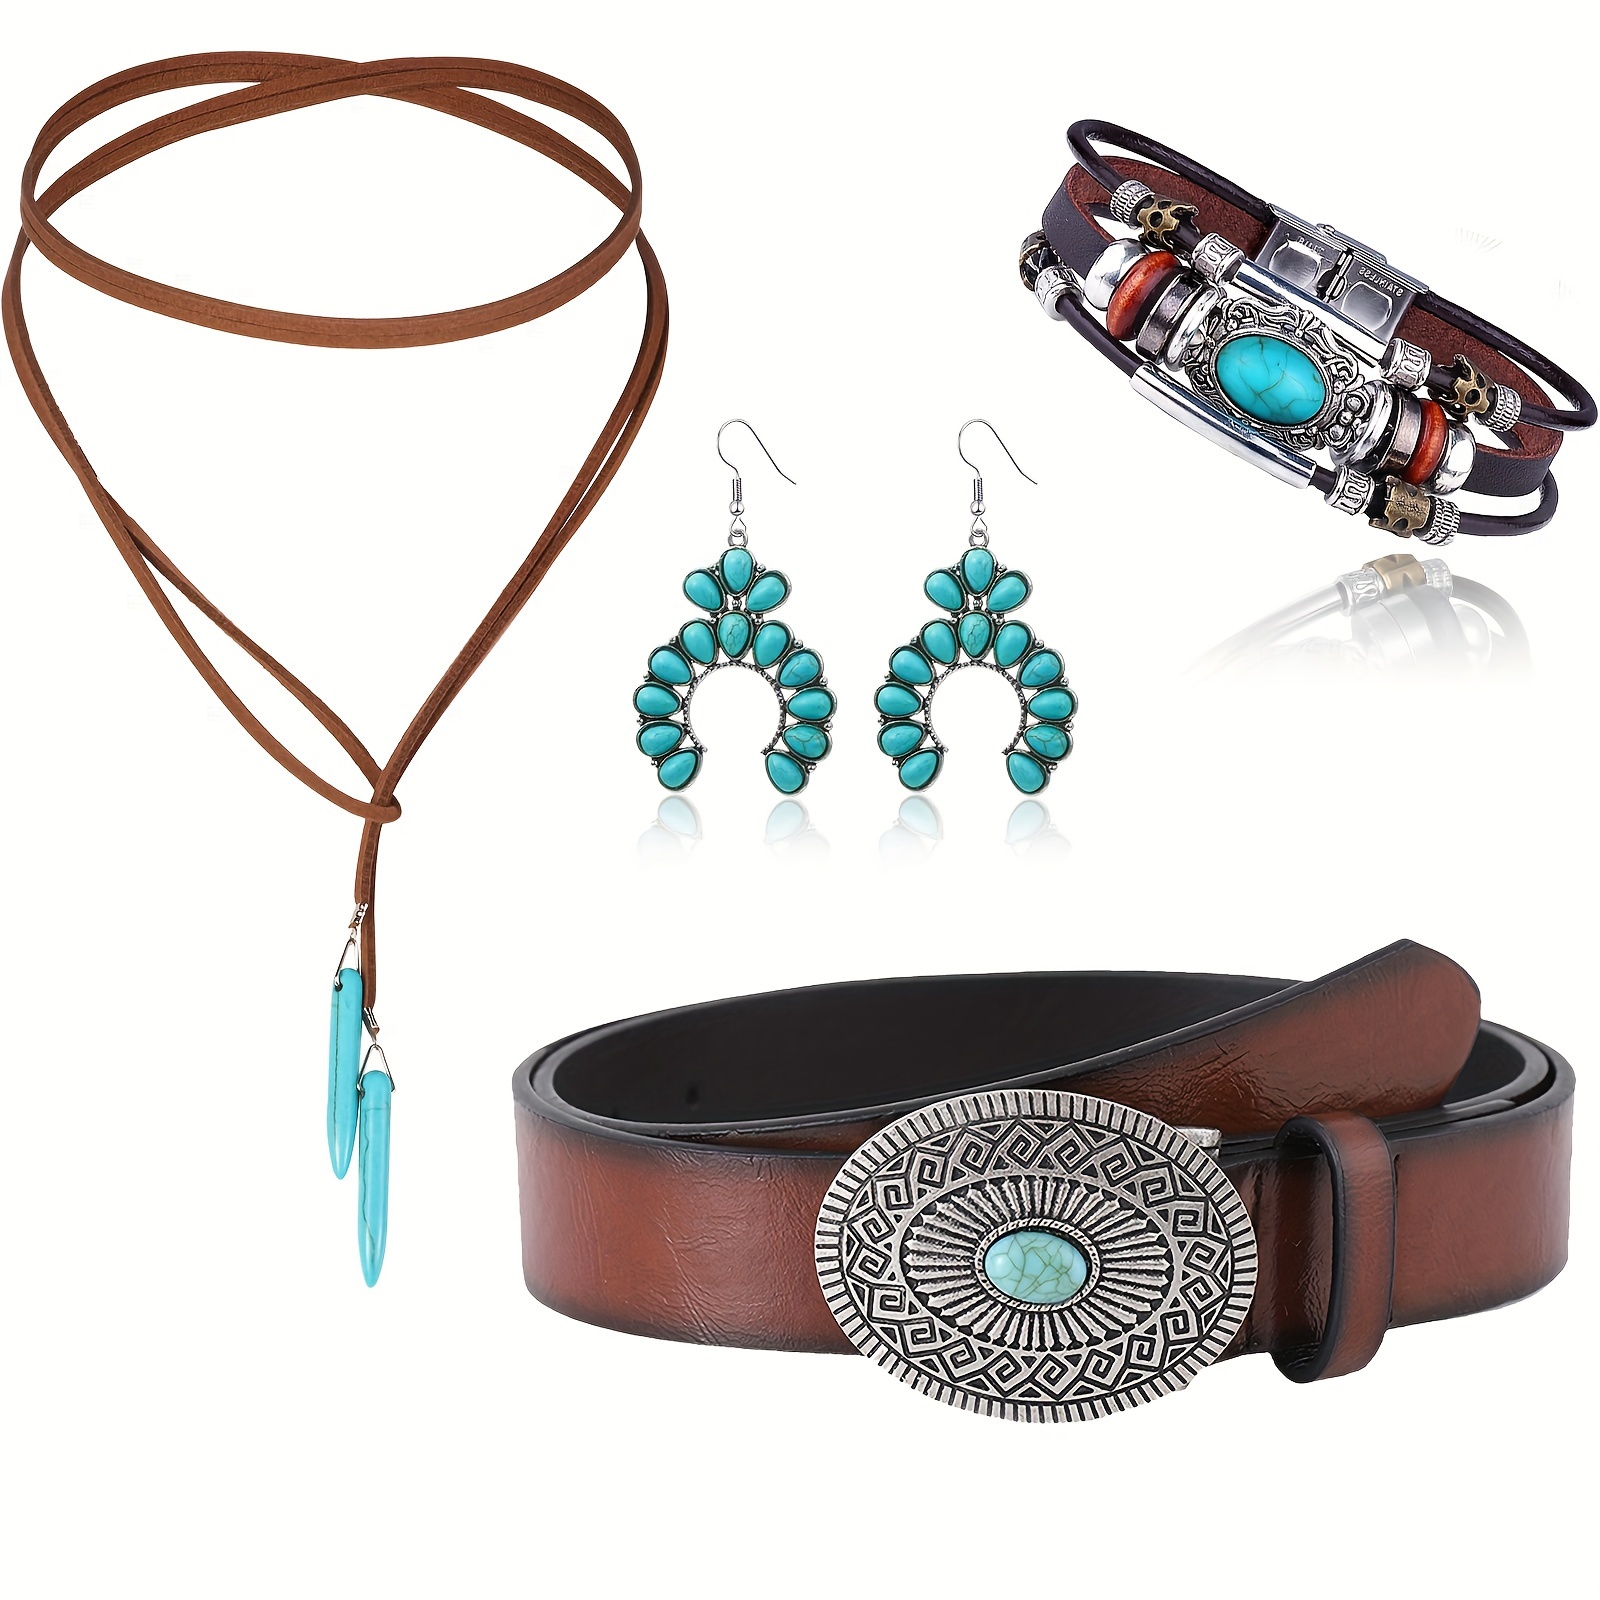 

5 Pcs Bohemian Turquoise Jewelry Set, Western Cowgirl Costume Accessories Kit With Turquoise Necklace Western Earrings Layered Leather Boho Bracelets And Adjustable Belt For Women